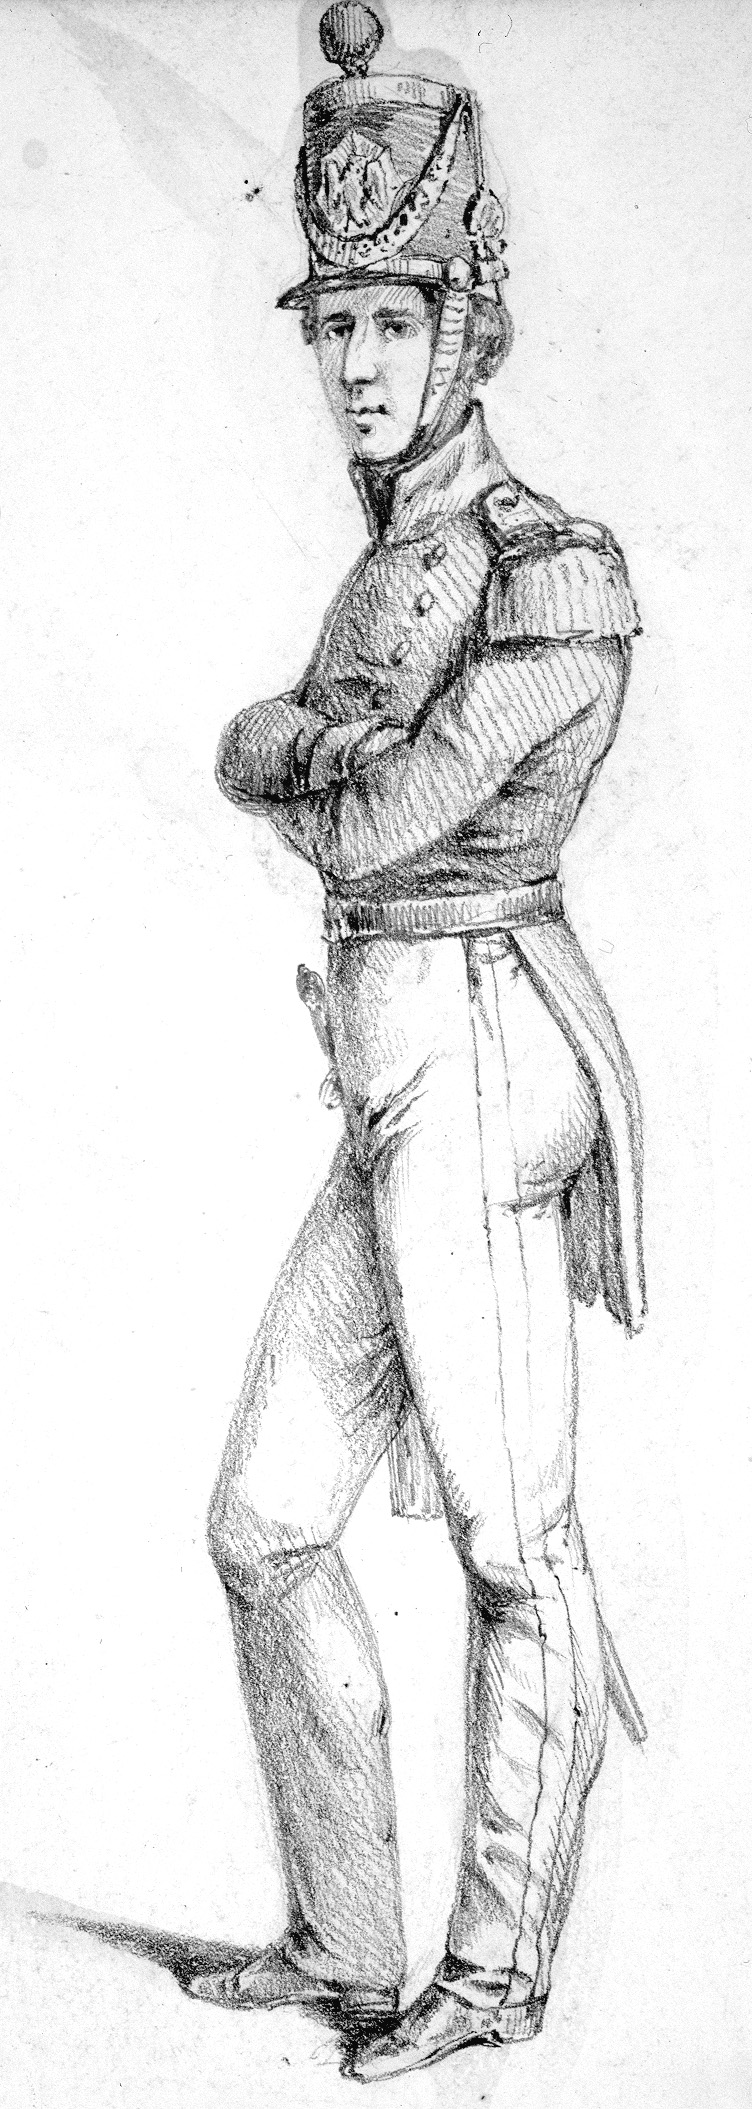 The uniform of the U.S. light artilleryman, as shown in this period drawing by August Koellner, was designed by Major Ringgold.